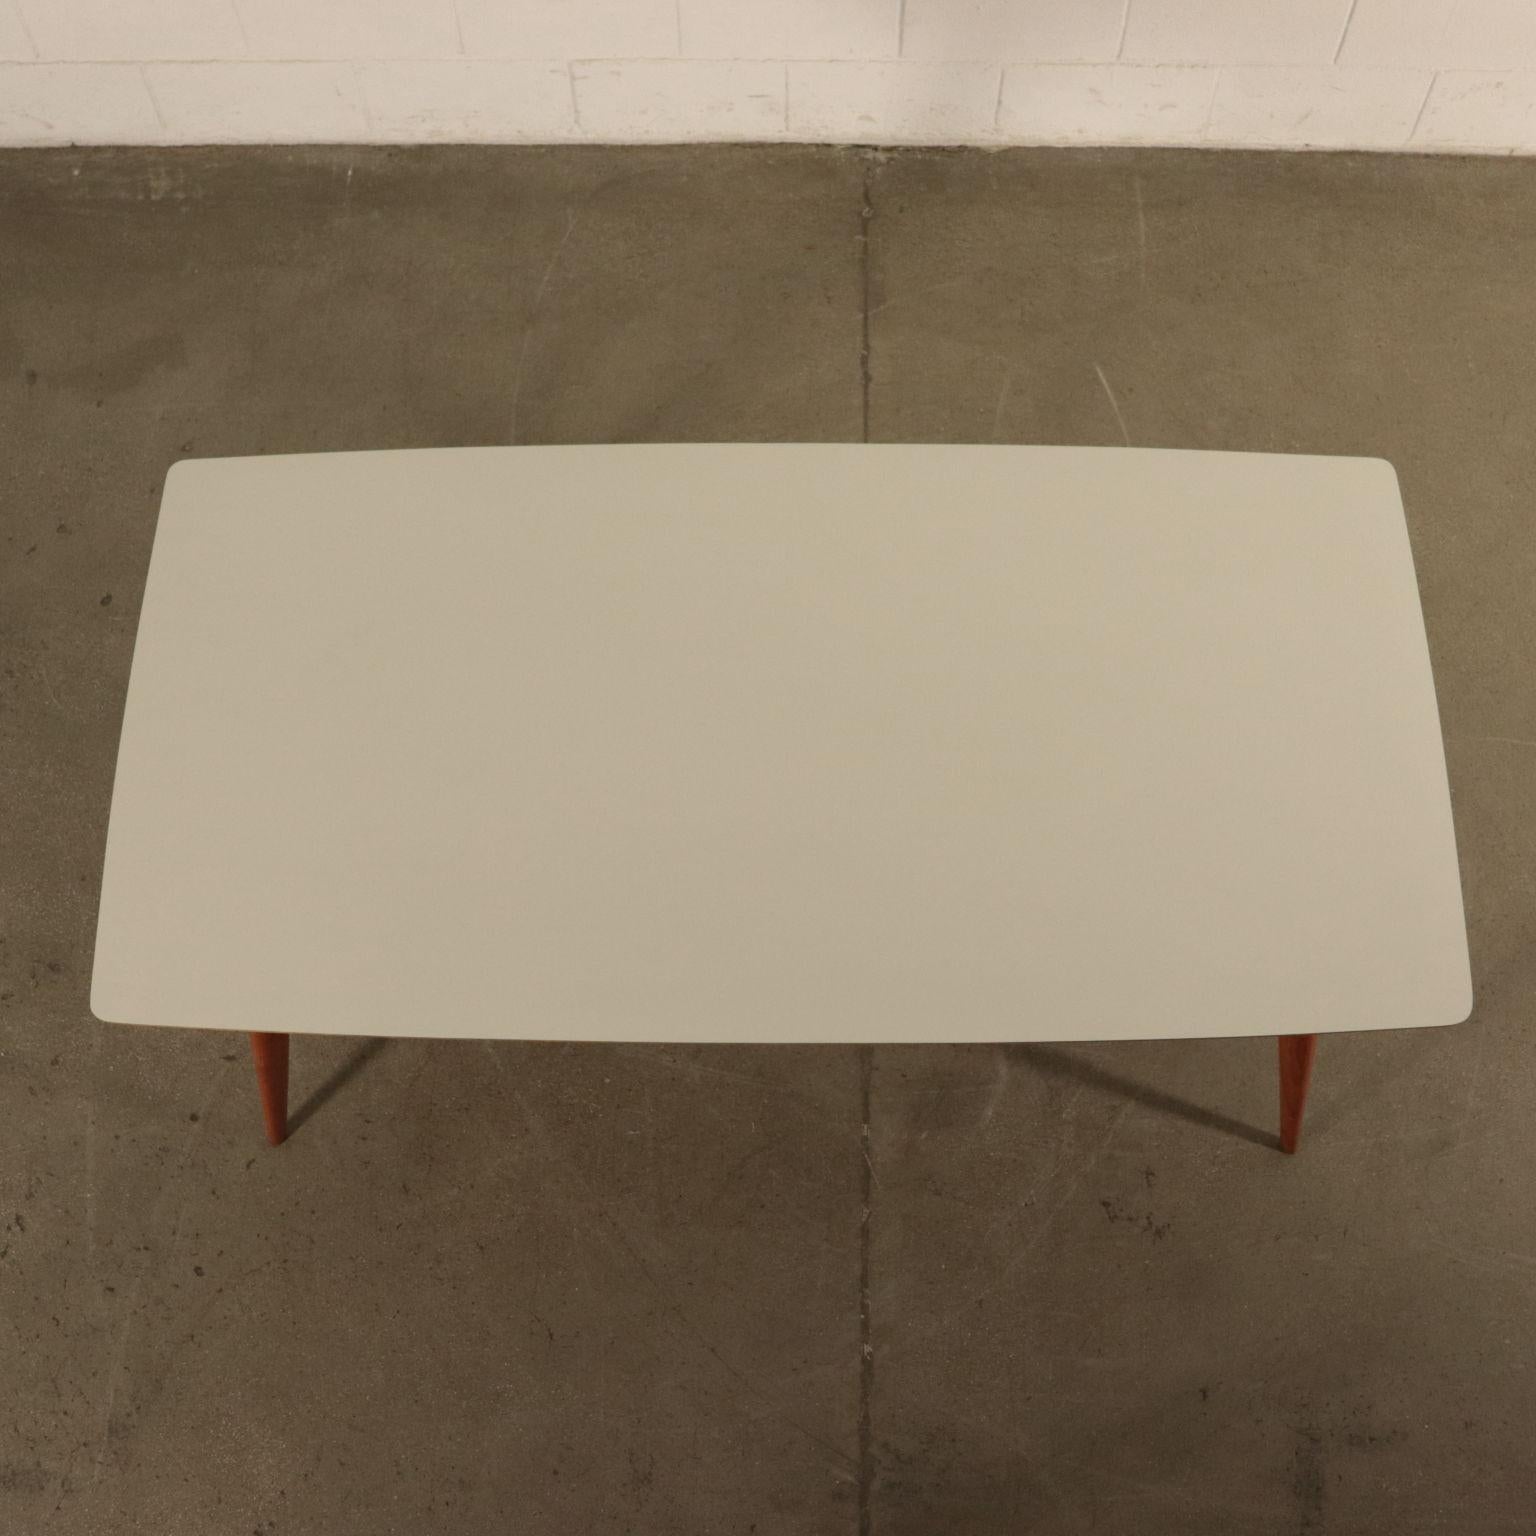 20th Century Table, Beech and Formica, Italy 1950s Italian Production